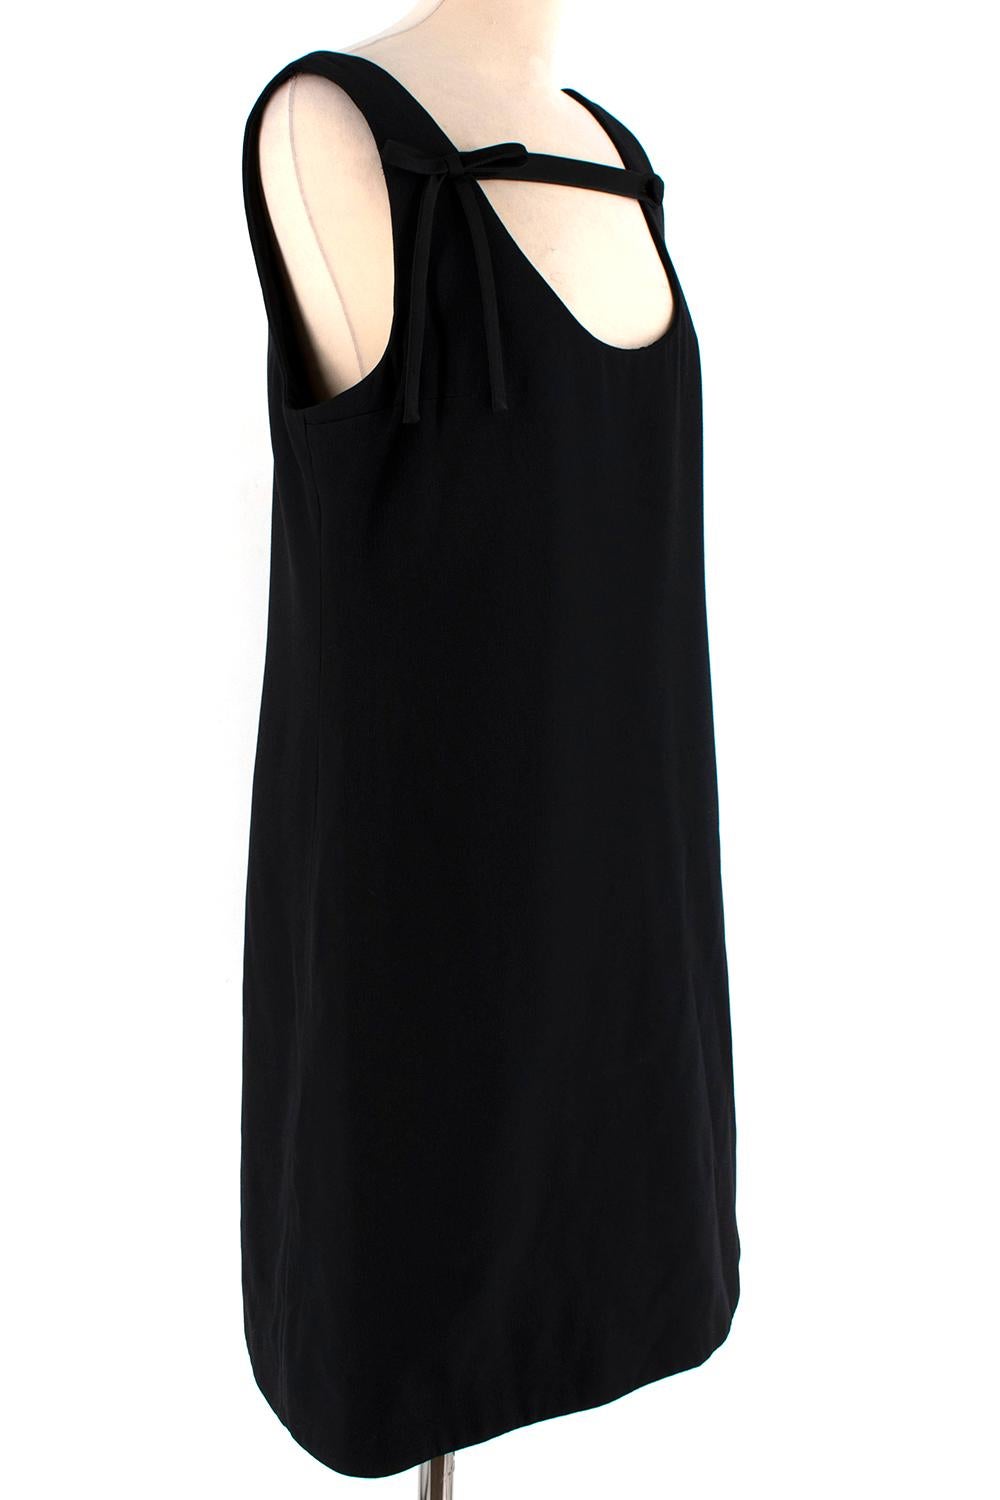 Prada Black Sleeveless Mini Dress with Bow 

-From the 2019 Spring collection 
-Sleeveless classic design 
-Inspired by the 60's 
-Satin strap detail to the neckline with a button fastening 
-Bow detail to the shoulder
-Zip fastening to the